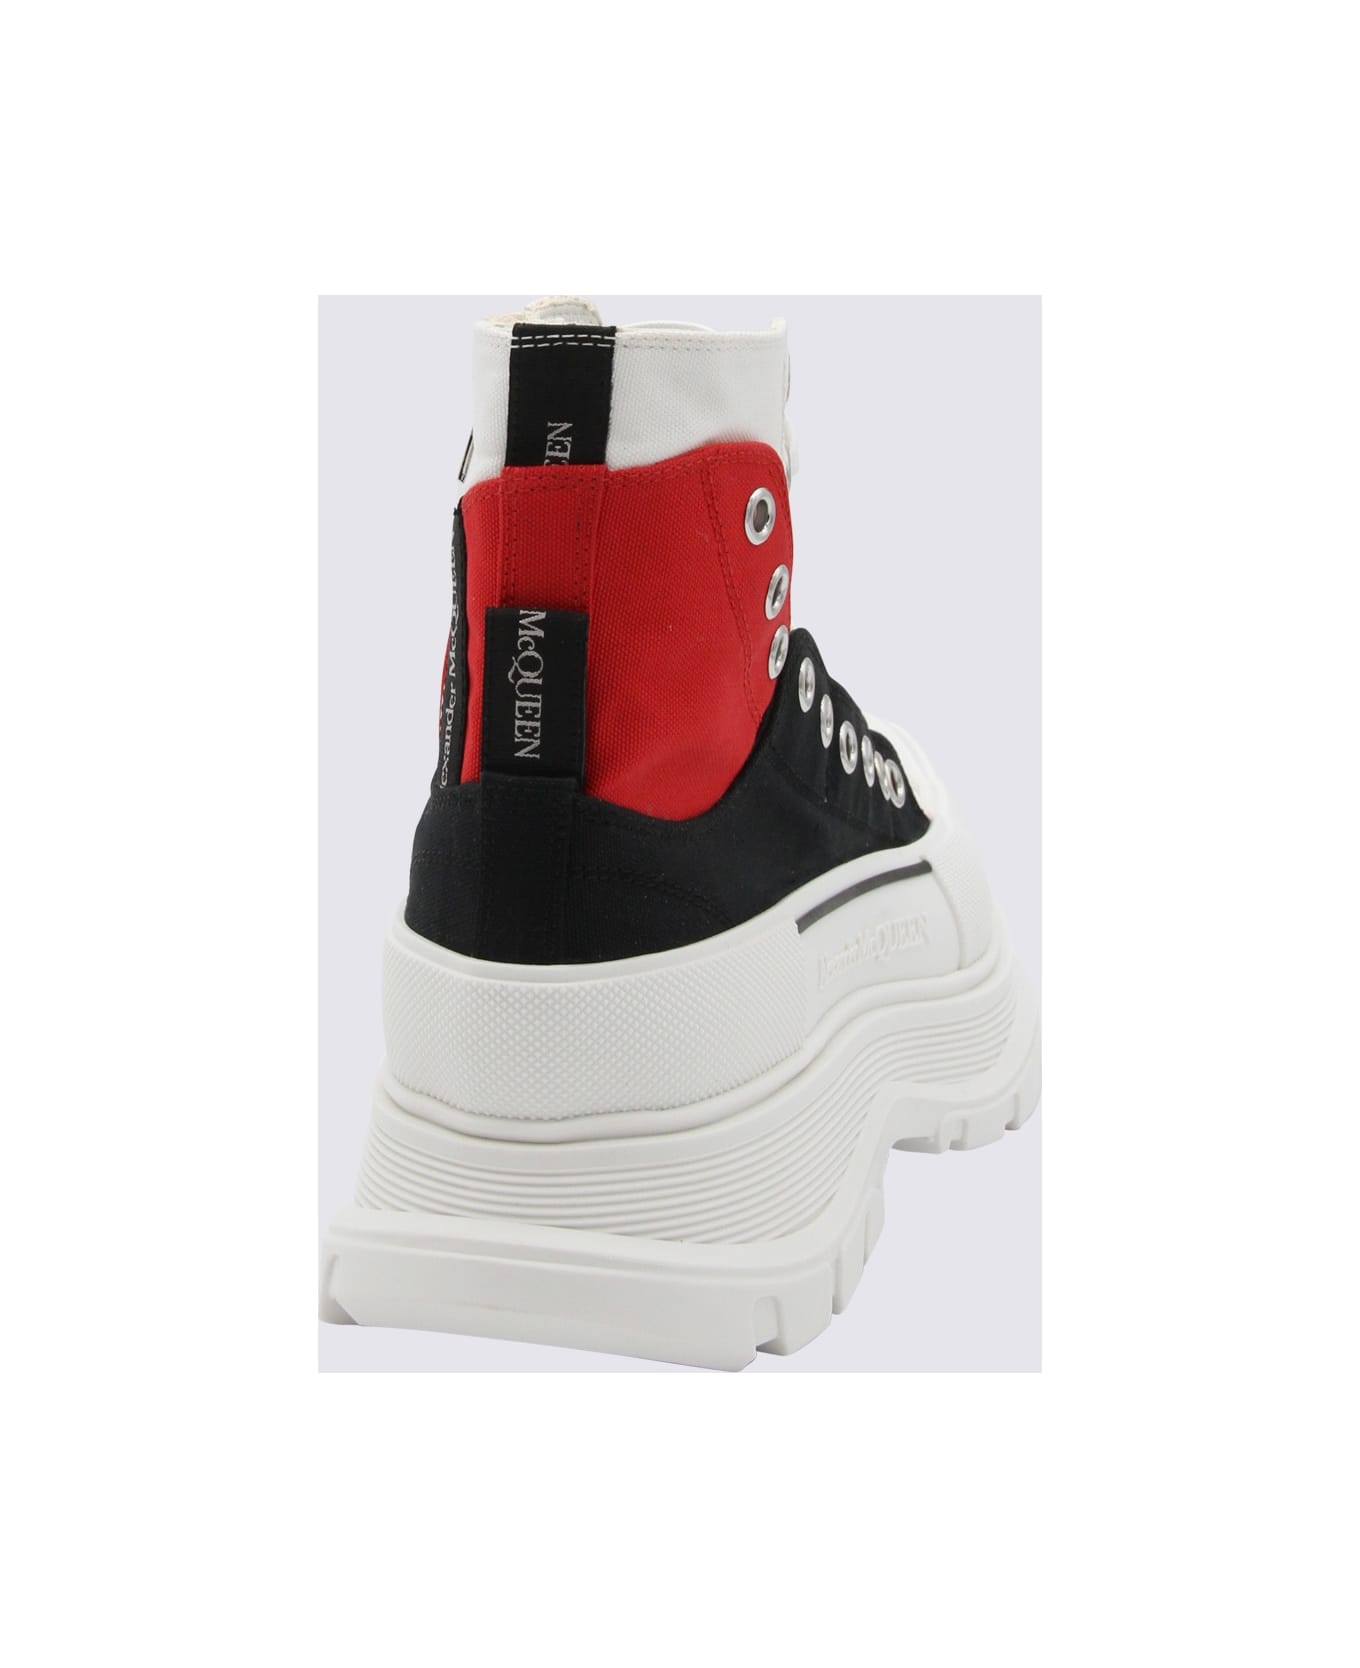 Alexander McQueen White Black And Red Canvas Boots - BLK/LR/WH スニーカー